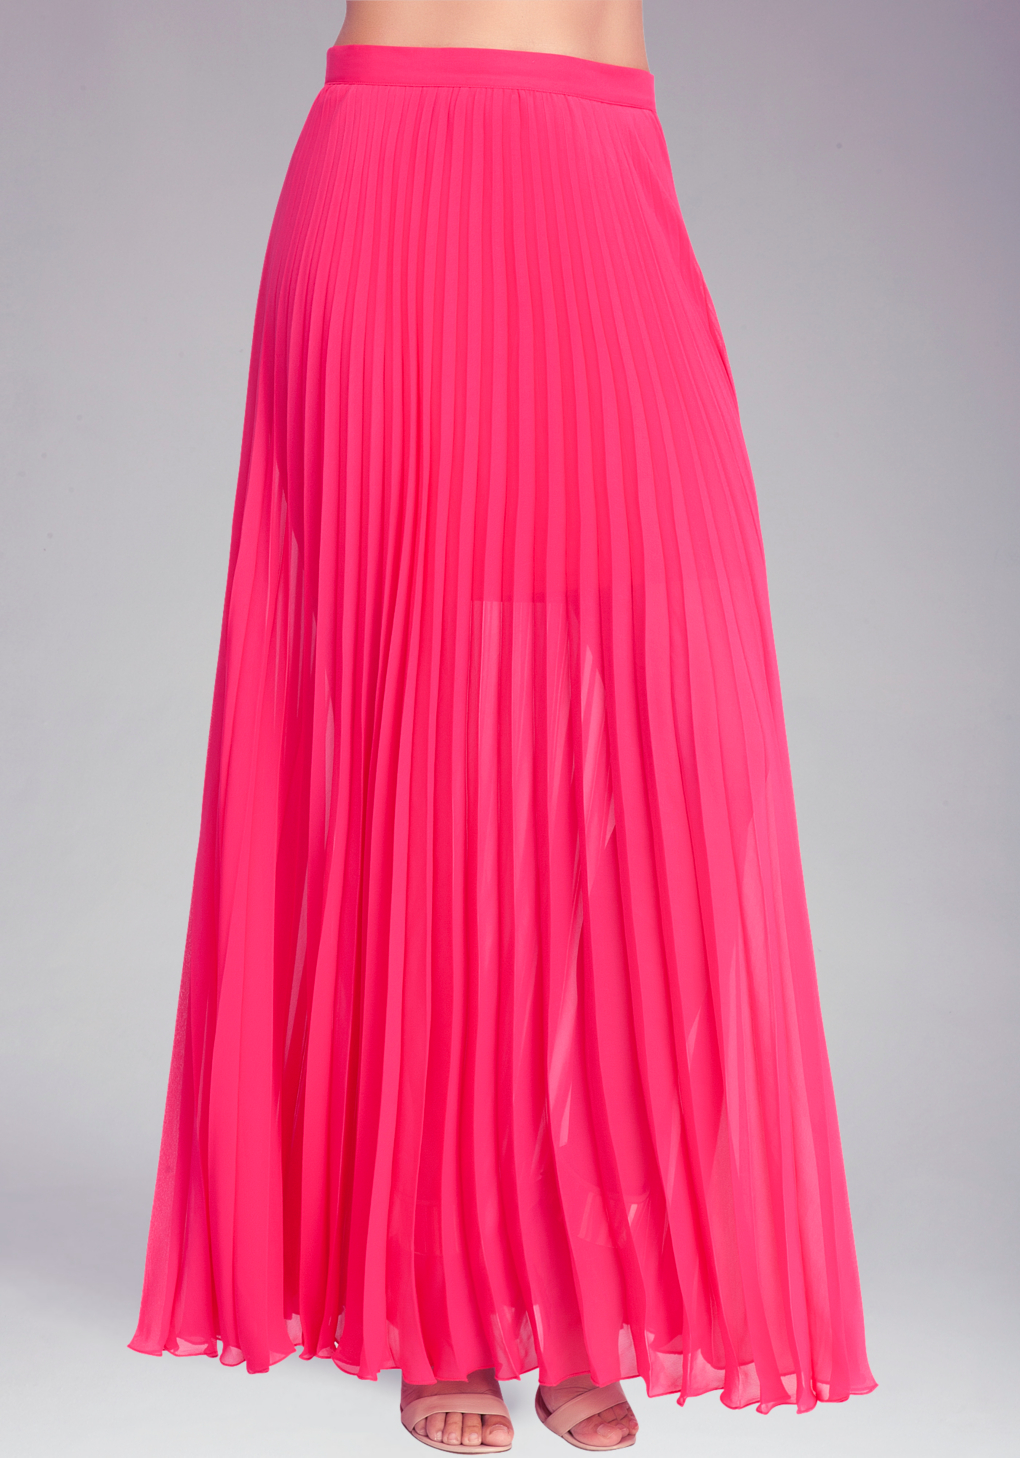 Lyst - Bebe Pleated Long Skirt in Pink